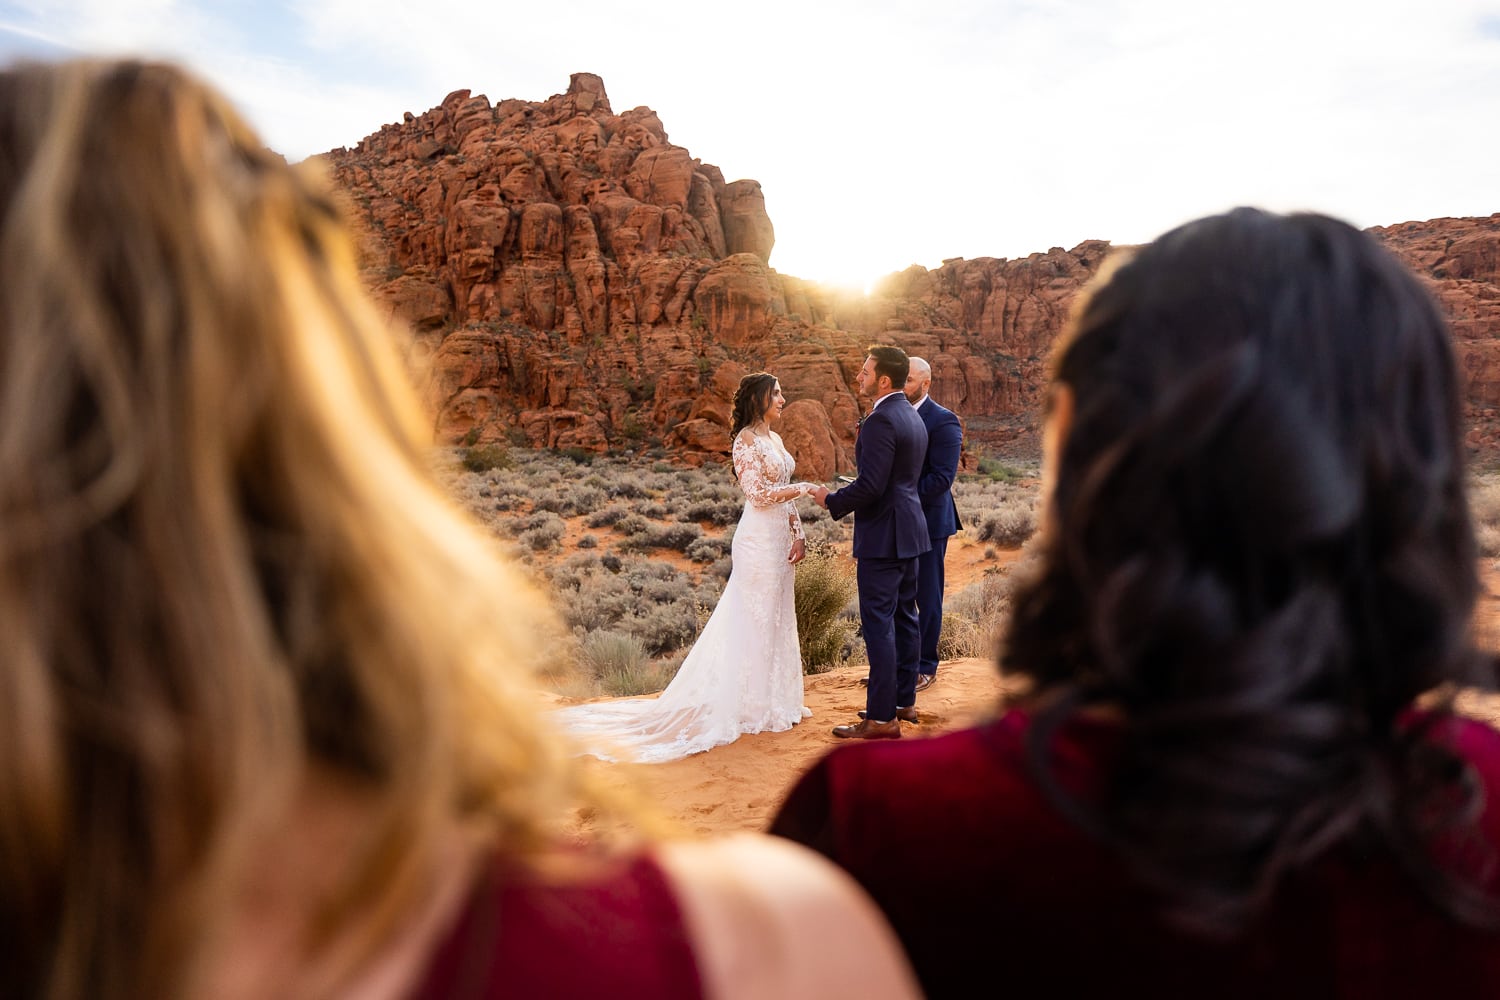 Elopement photos in Snow Canyon state park where the couple gets married on the sand dunes.